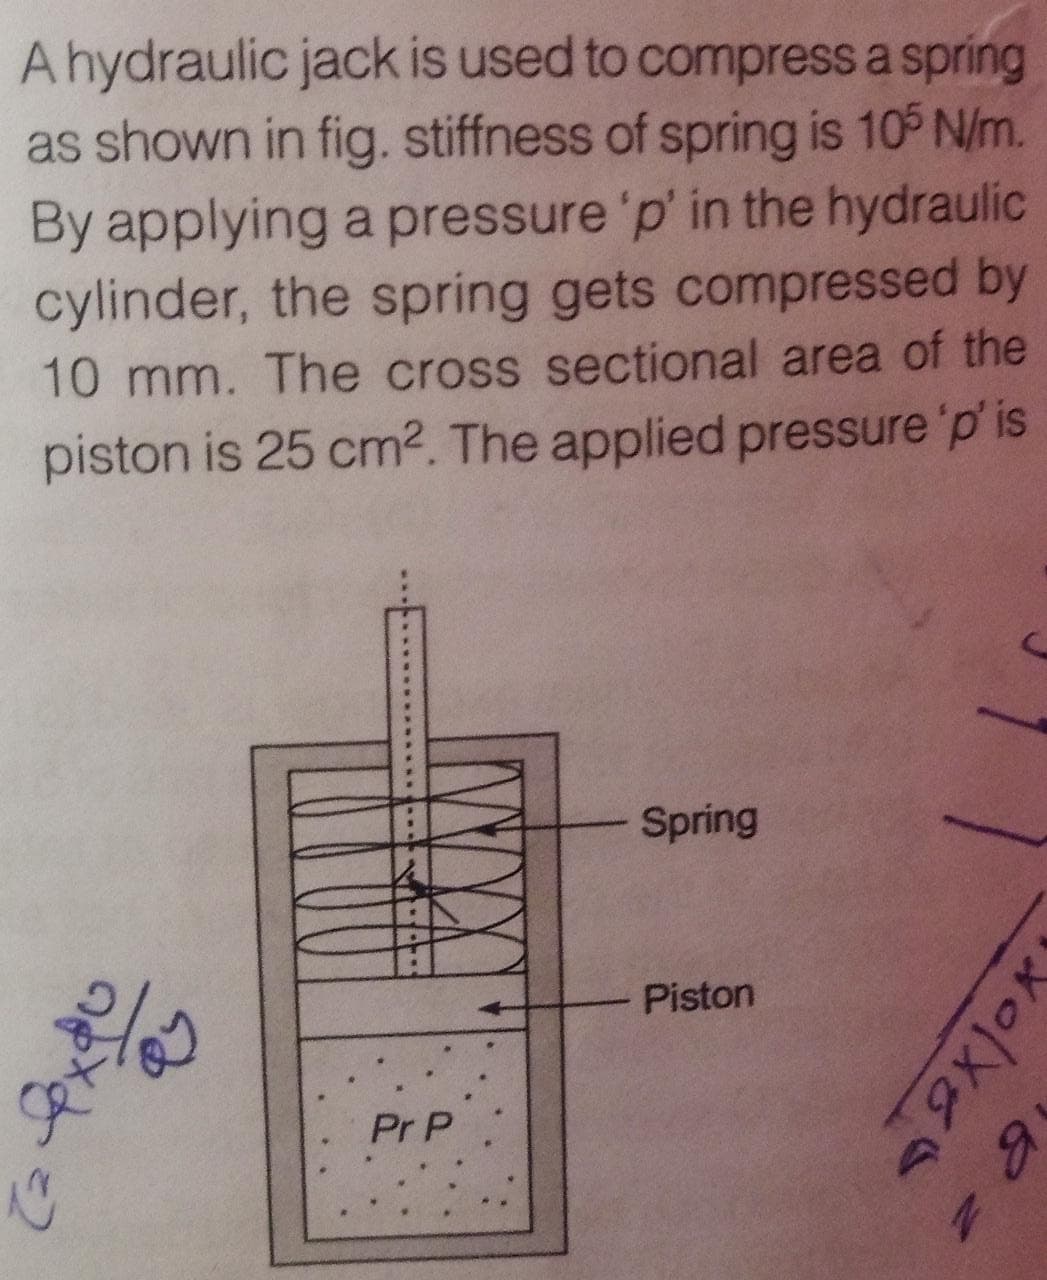 A hydraulic jack is used to compress a spring
as shown in fig. stiffness of spring is 10 N/m.
By applying a pressure 'p' in the hydraulic
cylinder, the spring gets compressed by
10 mm. The cross sectional area of the
piston is 25 cm². The applied pressure 'p' is
Spring
Piston
Pr P
